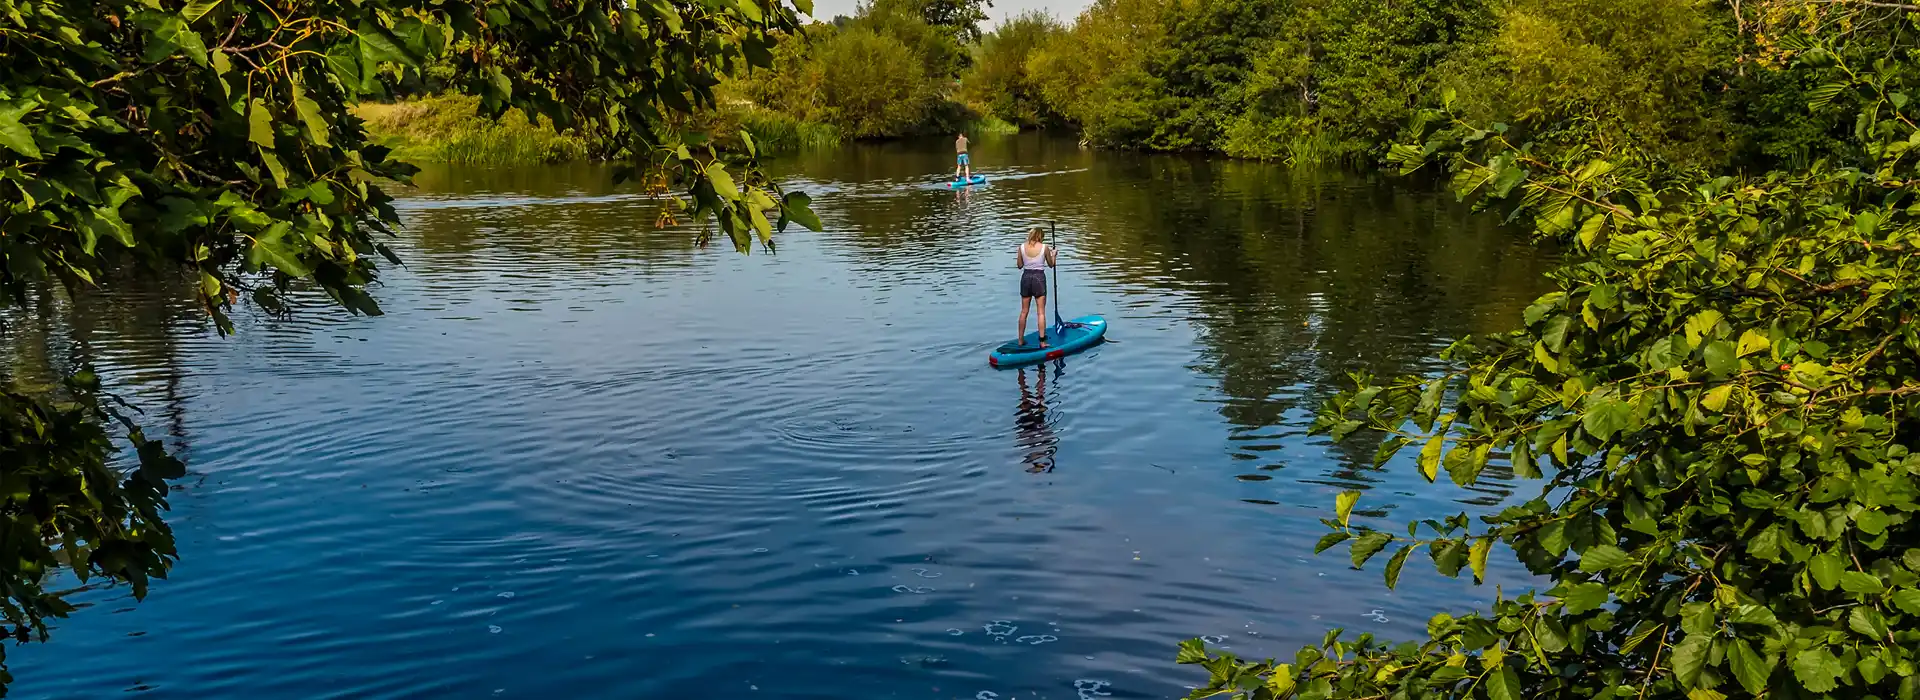 Campsites for paddleboarding